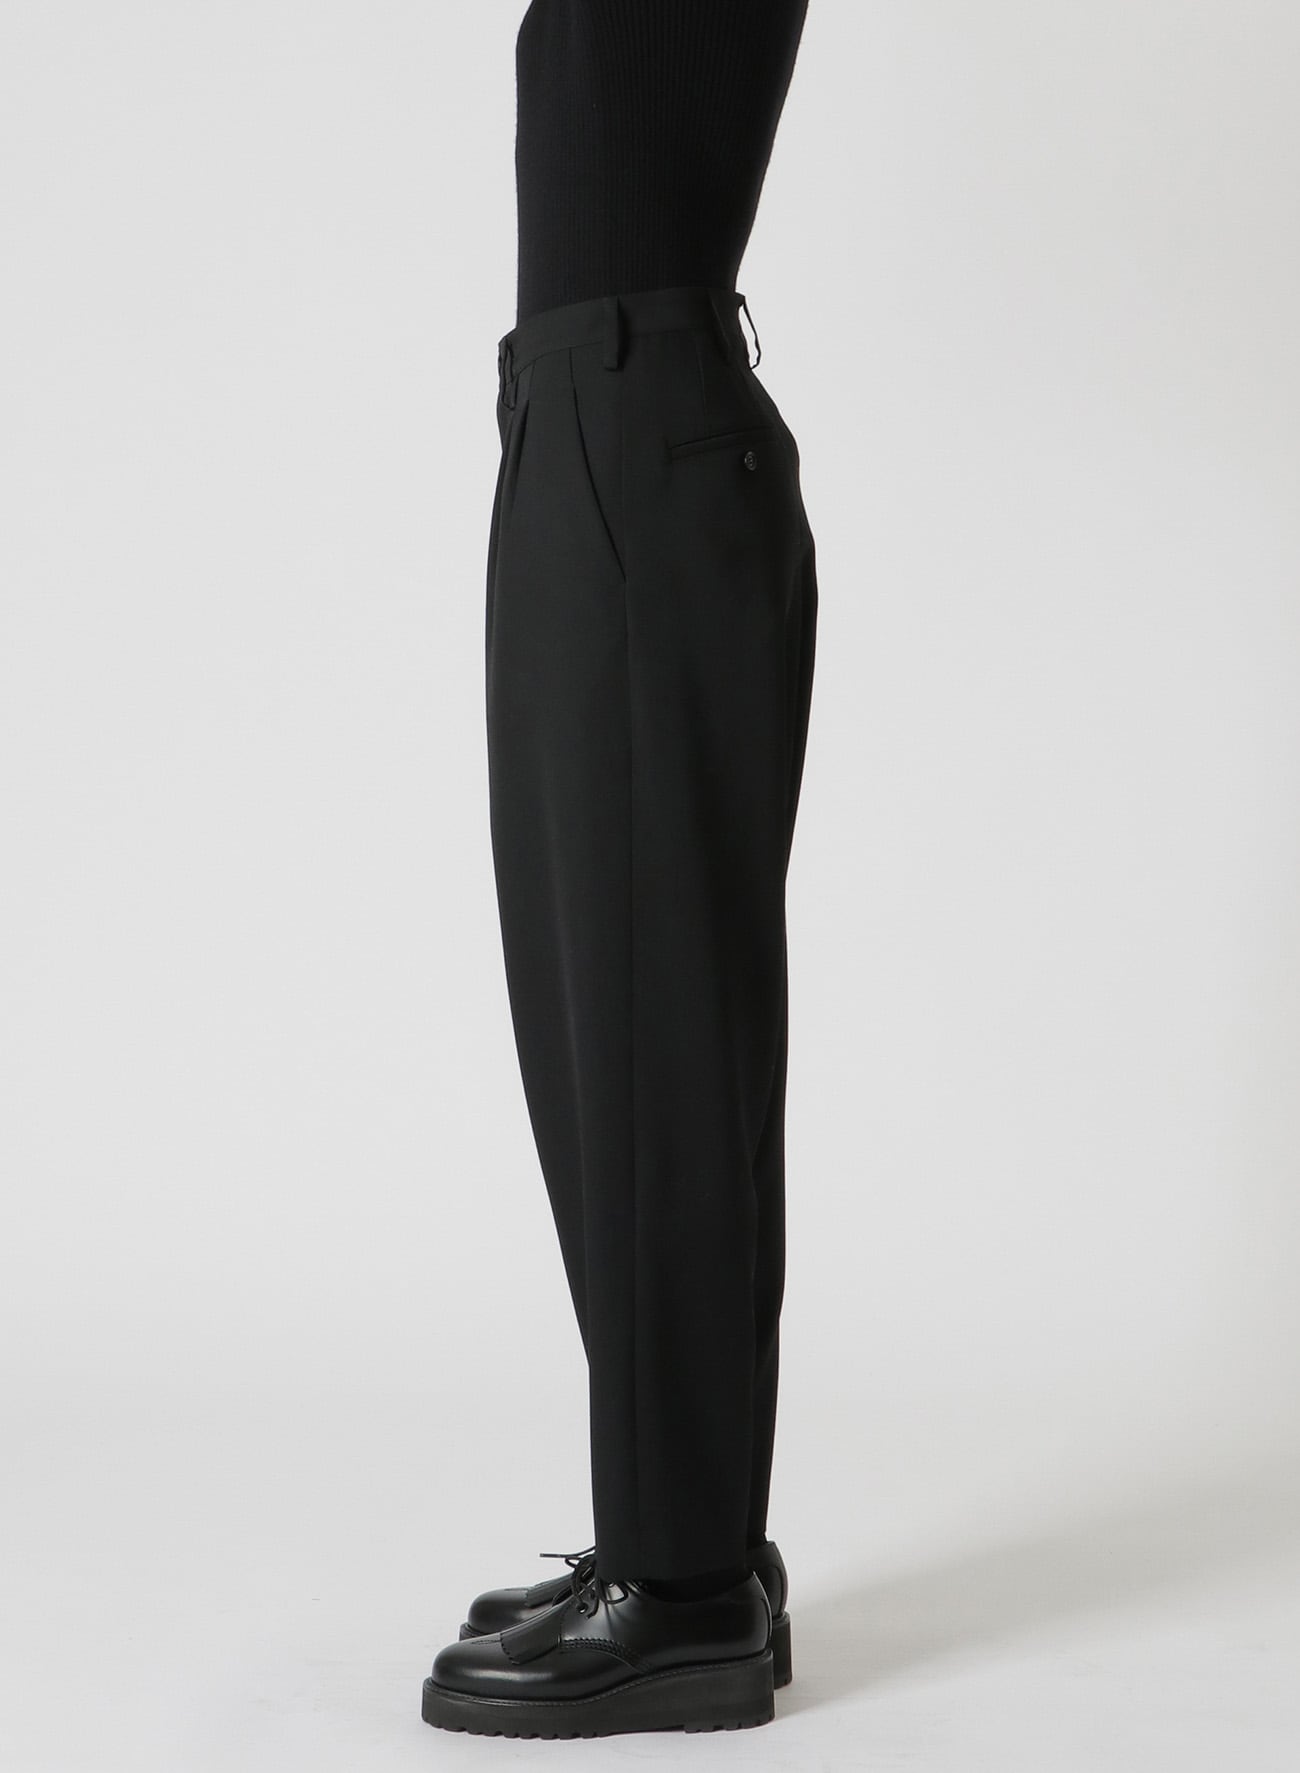 lownn 20aw DOUBLE PLEATED TROUSERS - スラックス